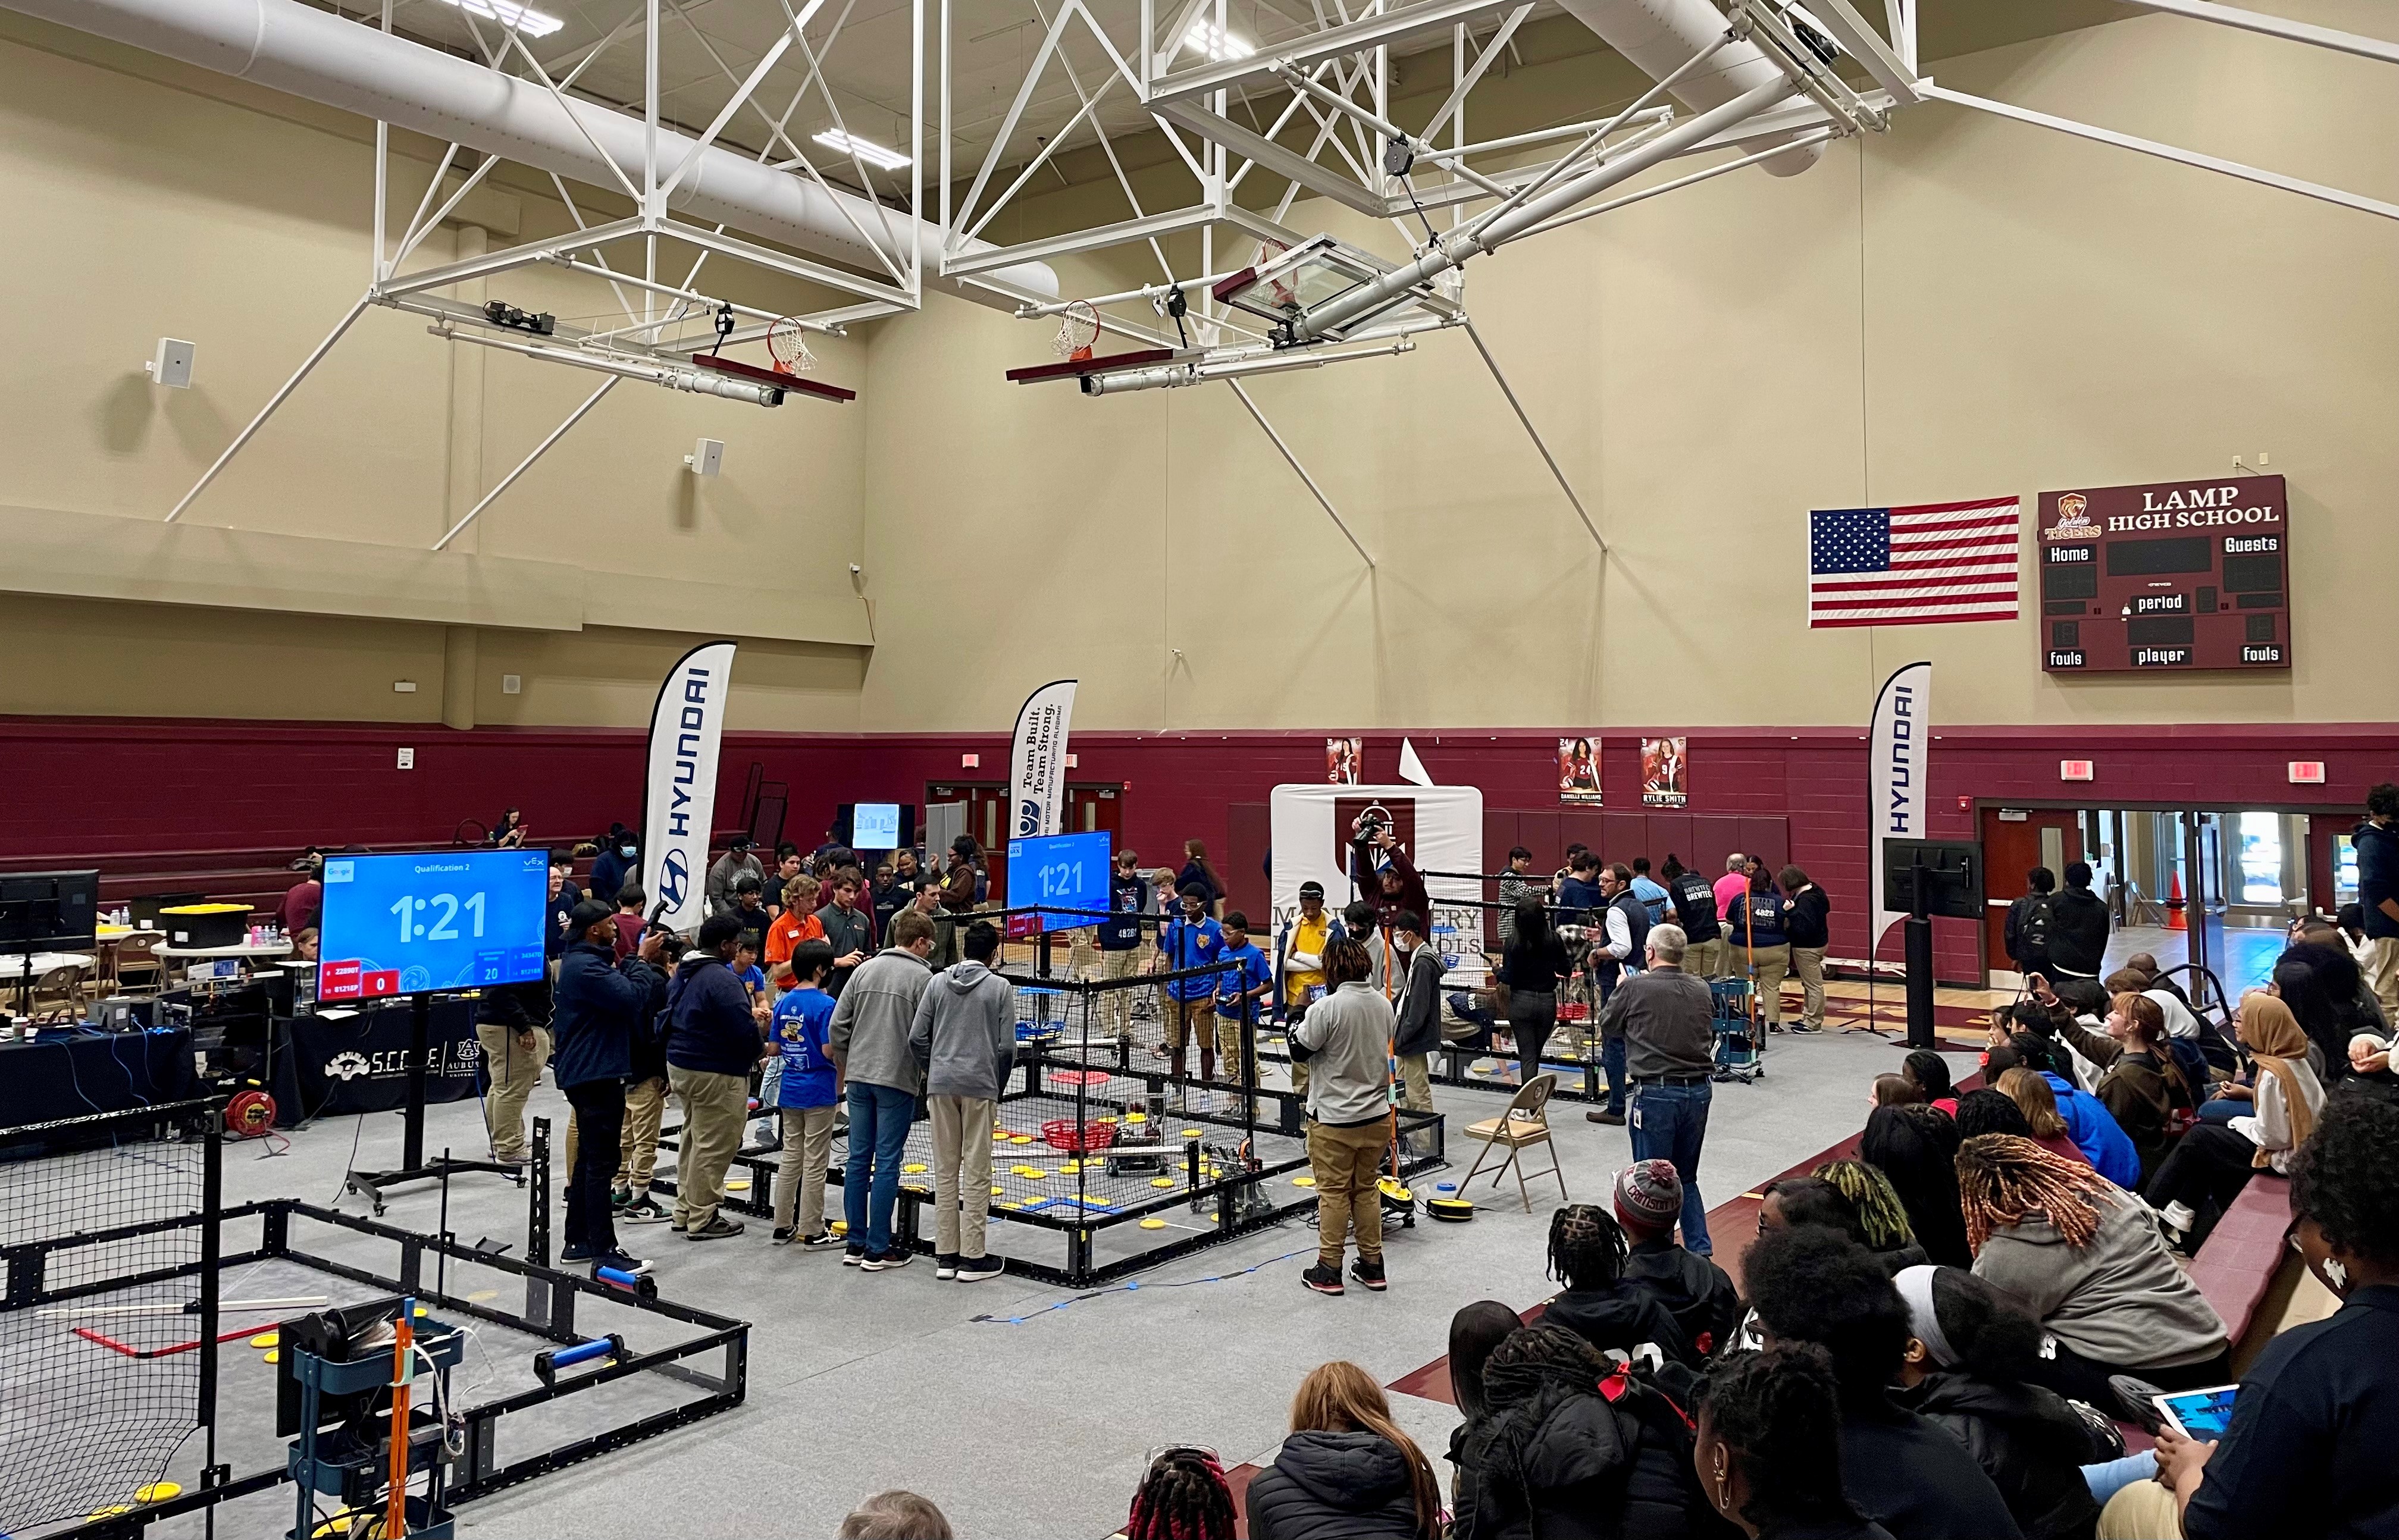 Over 100 high school students from each of the eight MPS high schools competed at the first HIRE robotics tournament on November 18.